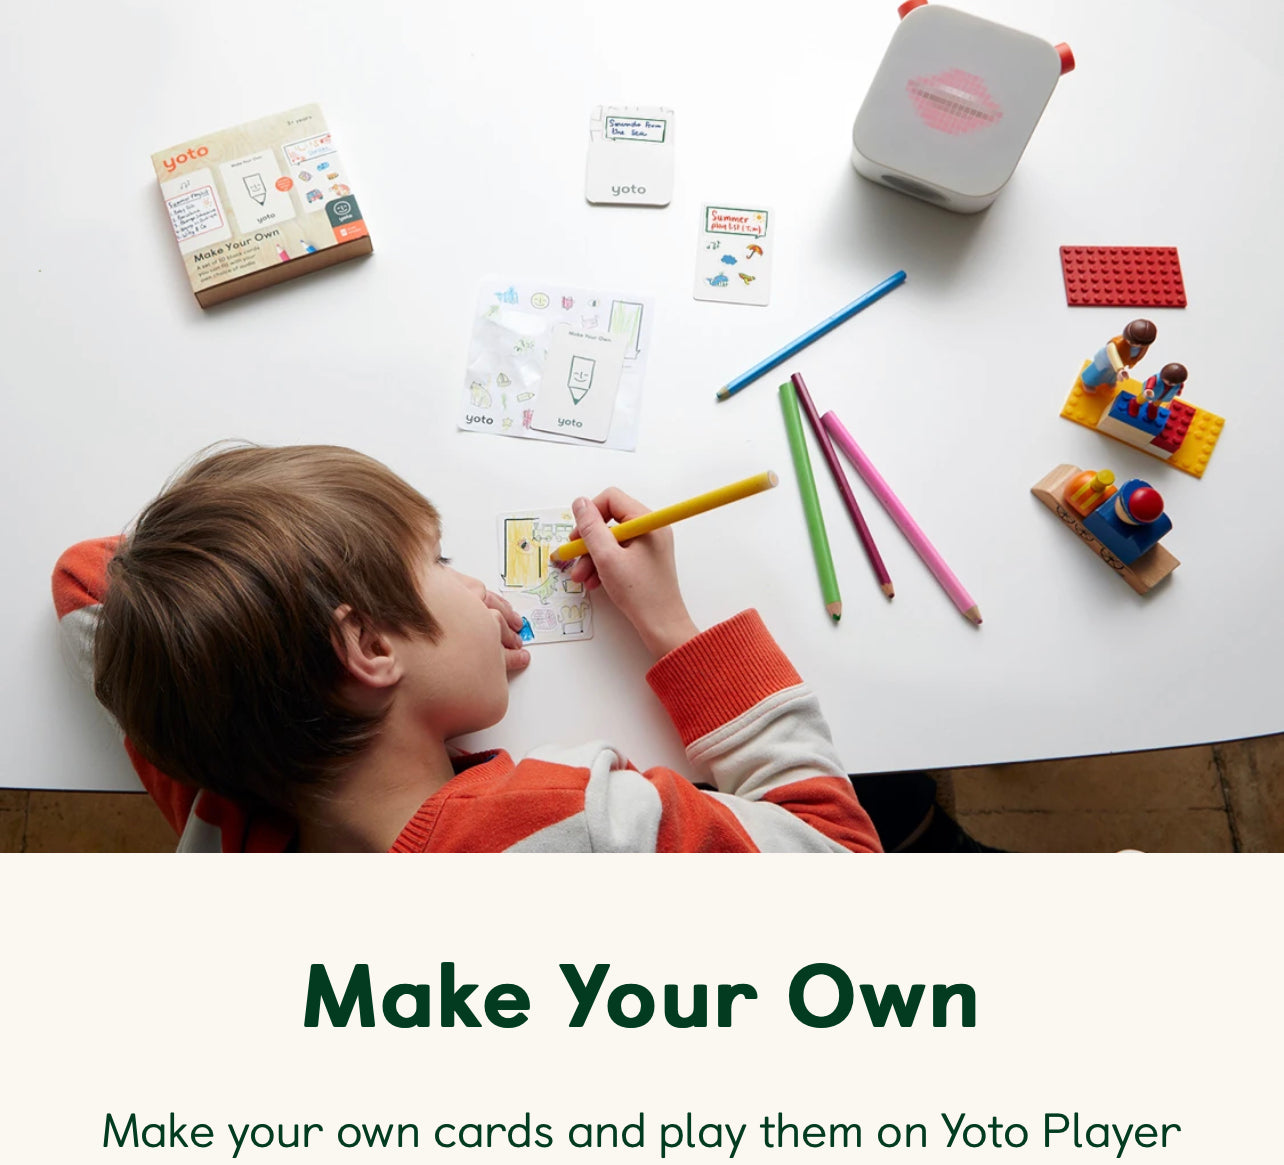 Make Your Own Cards (Pack of 10 blank cards) for Yoto Player